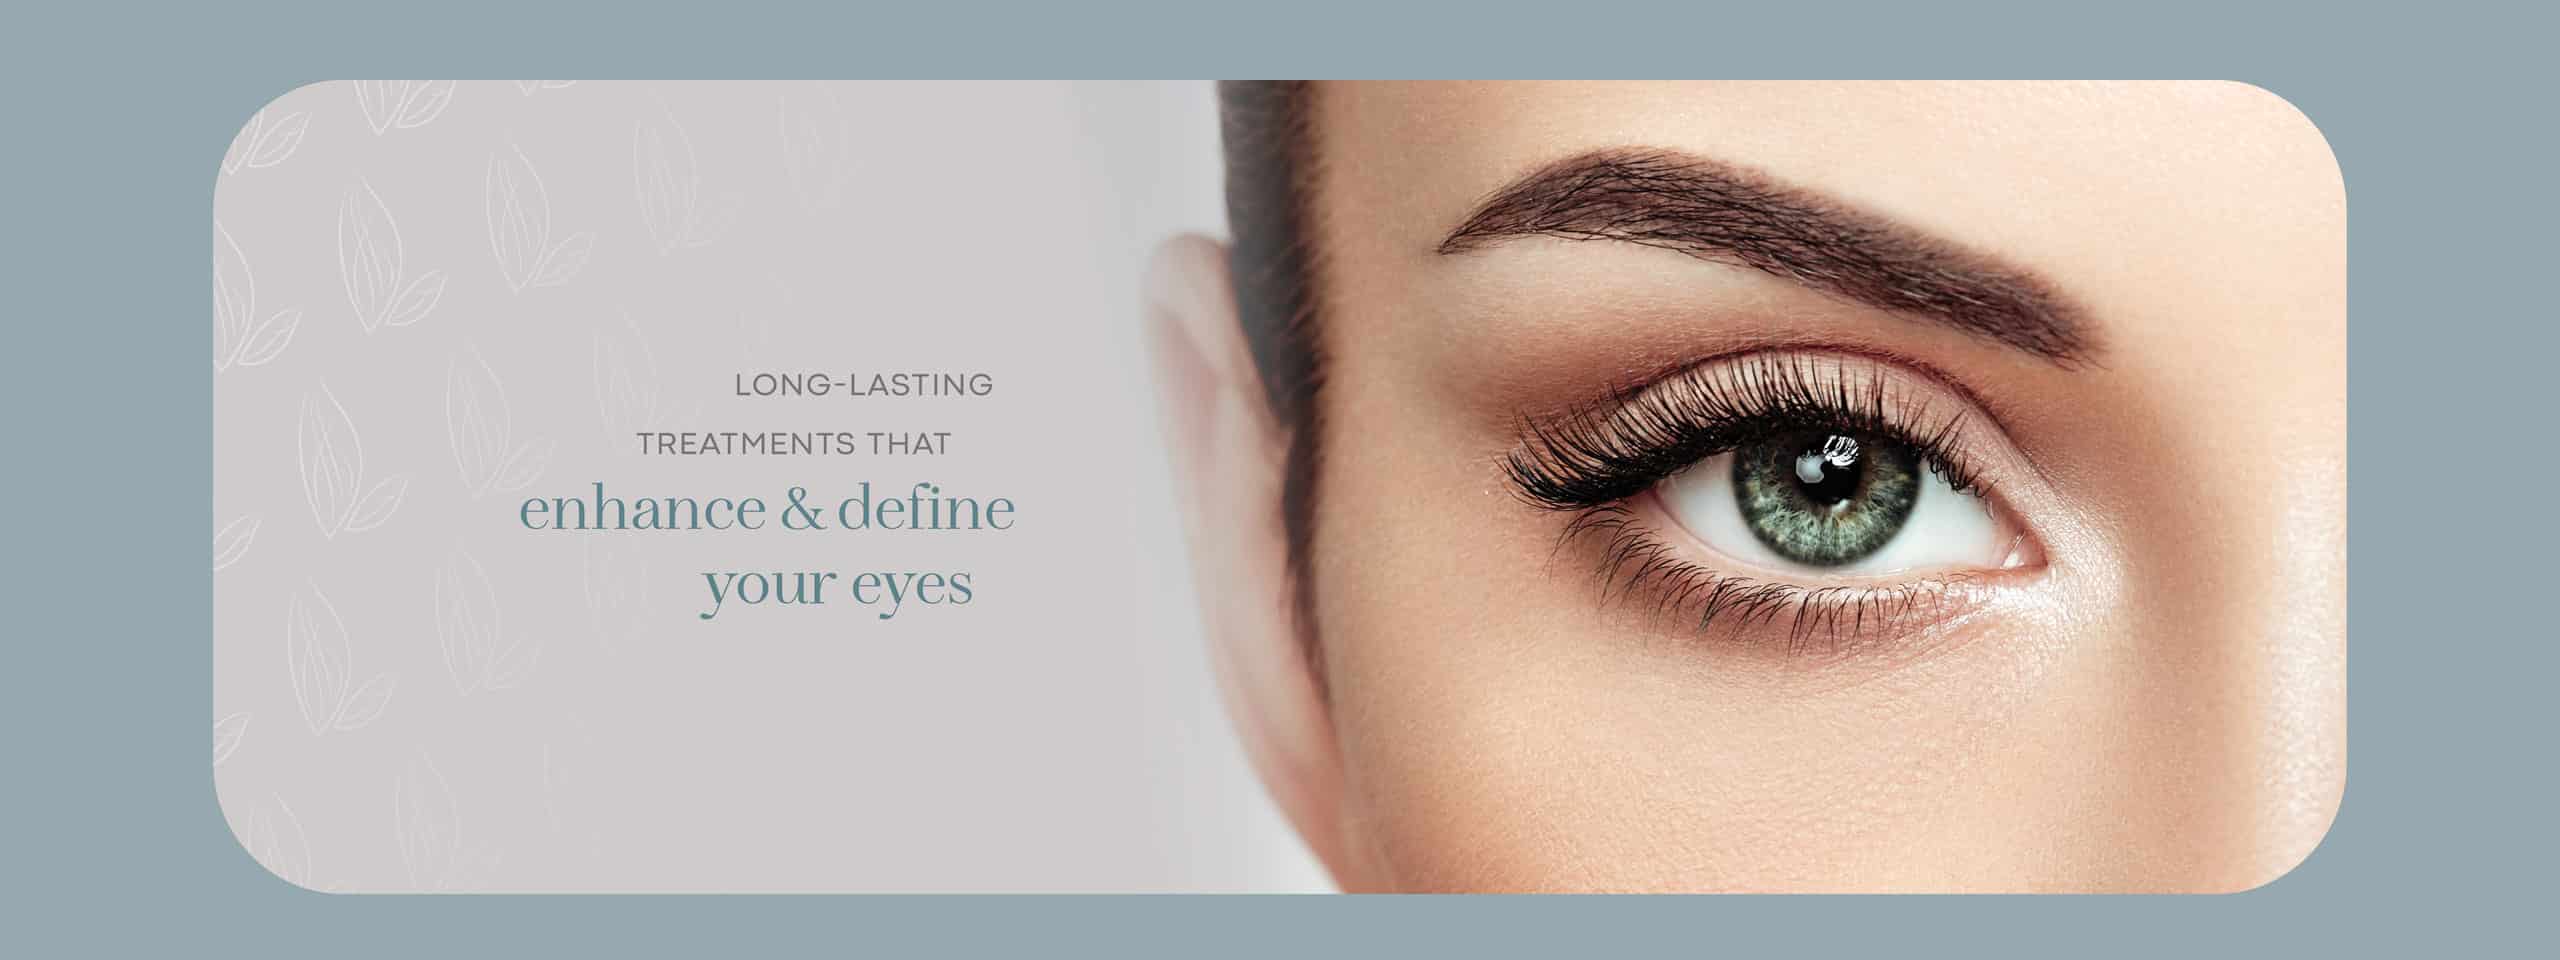 Enhance and define lashes and brows at FBT Faith in Beauty Medical Aesthetics in Medway MA